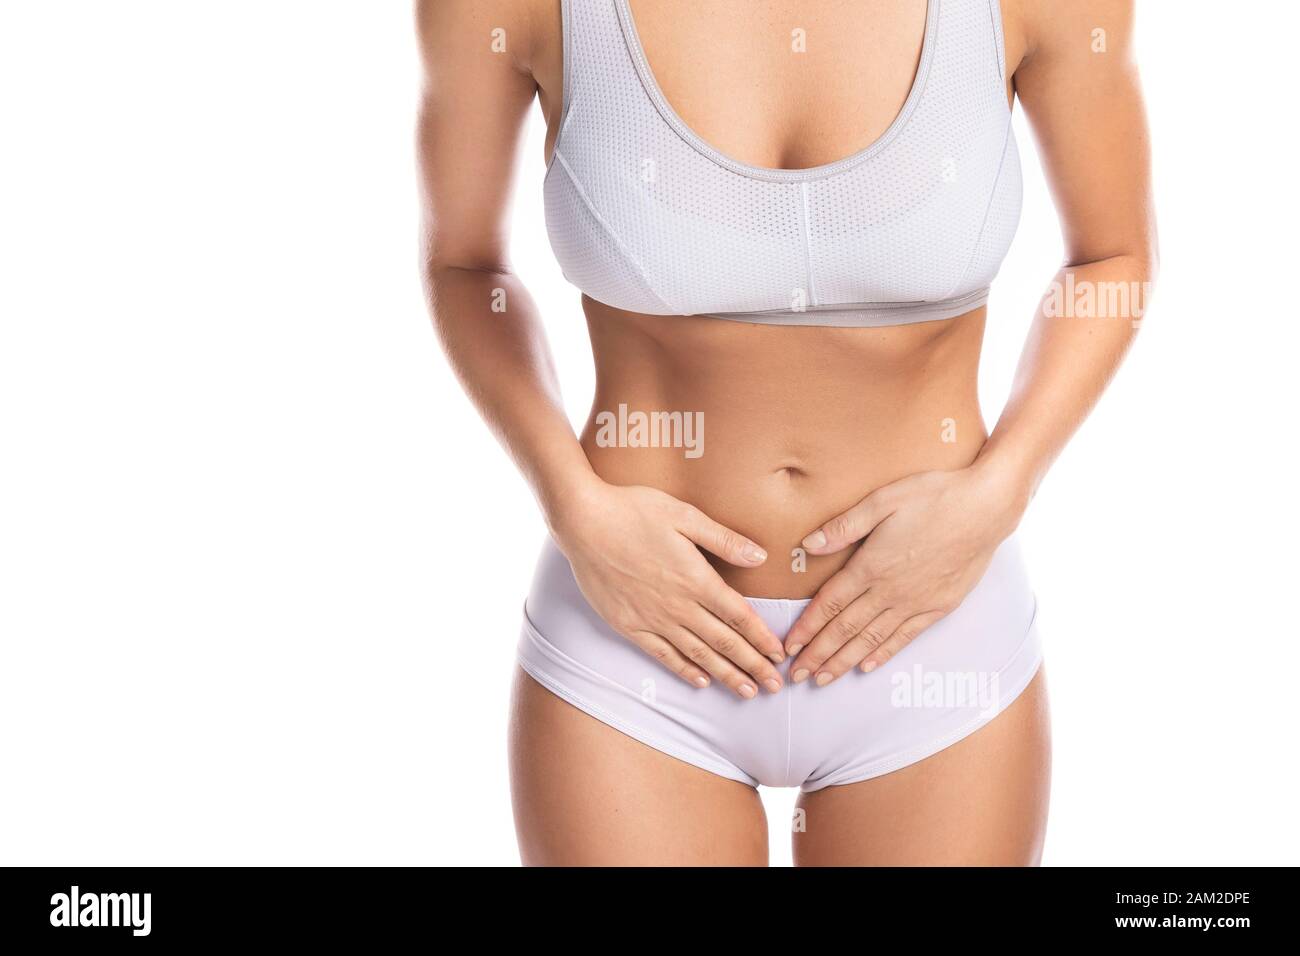 Woman is feeling pain in lower part of her stomach on white background Stock Photo